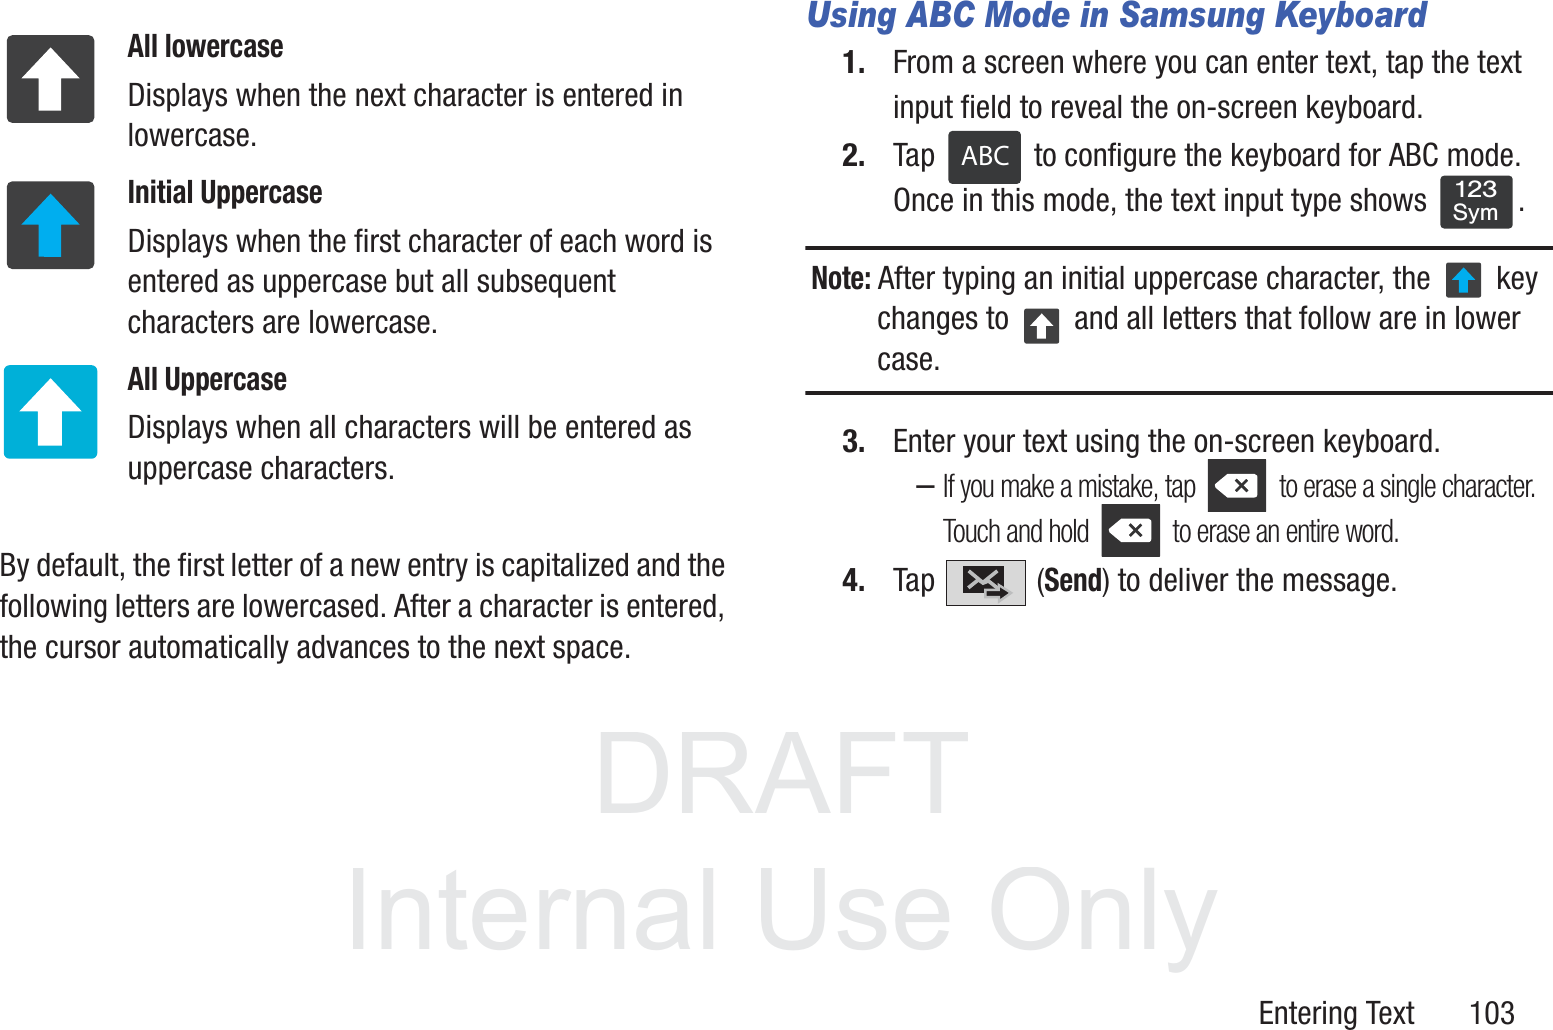 DRAFT InternalUse OnlyEntering Text       103  By default, the first letter of a new entry is capitalized and the following letters are lowercased. After a character is entered, the cursor automatically advances to the next space.Using ABC Mode in Samsung Keyboard1. From a screen where you can enter text, tap the text input field to reveal the on-screen keyboard.2. Tap   to configure the keyboard for ABC mode. Once in this mode, the text input type shows  .Note: After typing an initial uppercase character, the   key changes to   and all letters that follow are in lower case.3. Enter your text using the on-screen keyboard.–If you make a mistake, tap   to erase a single character. Touch and hold   to erase an entire word.4. Tap  (Send) to deliver the message.All lowercaseDisplays when the next character is entered in lowercase.Initial UppercaseDisplays when the first character of each word is entered as uppercase but all subsequent characters are lowercase.All UppercaseDisplays when all characters will be entered as uppercase characters.ABC123Sym